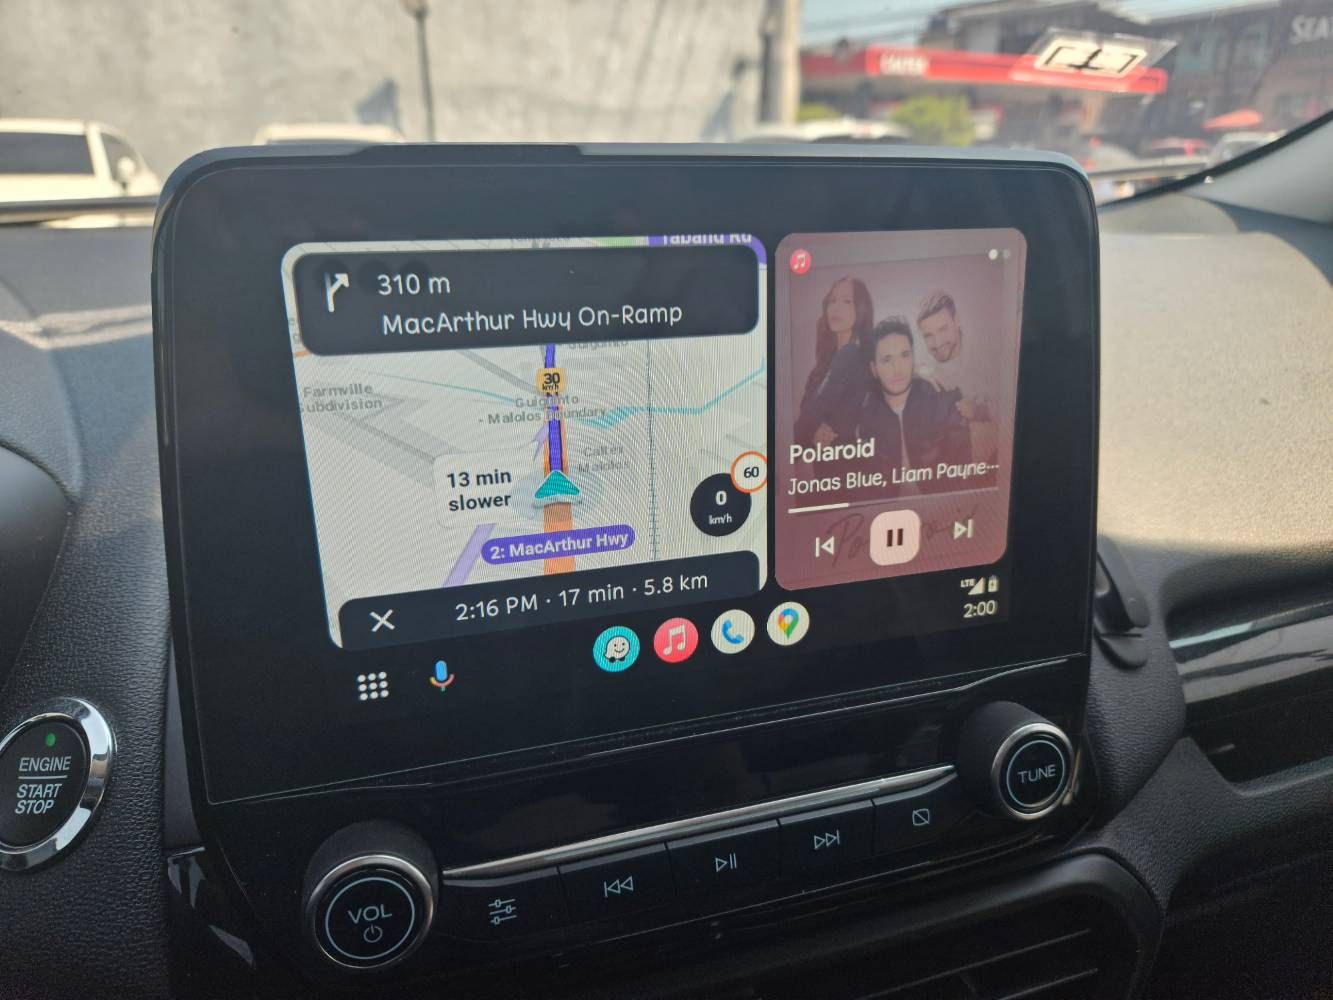 Android, on your car display: Using Android Auto w - Samsung Members